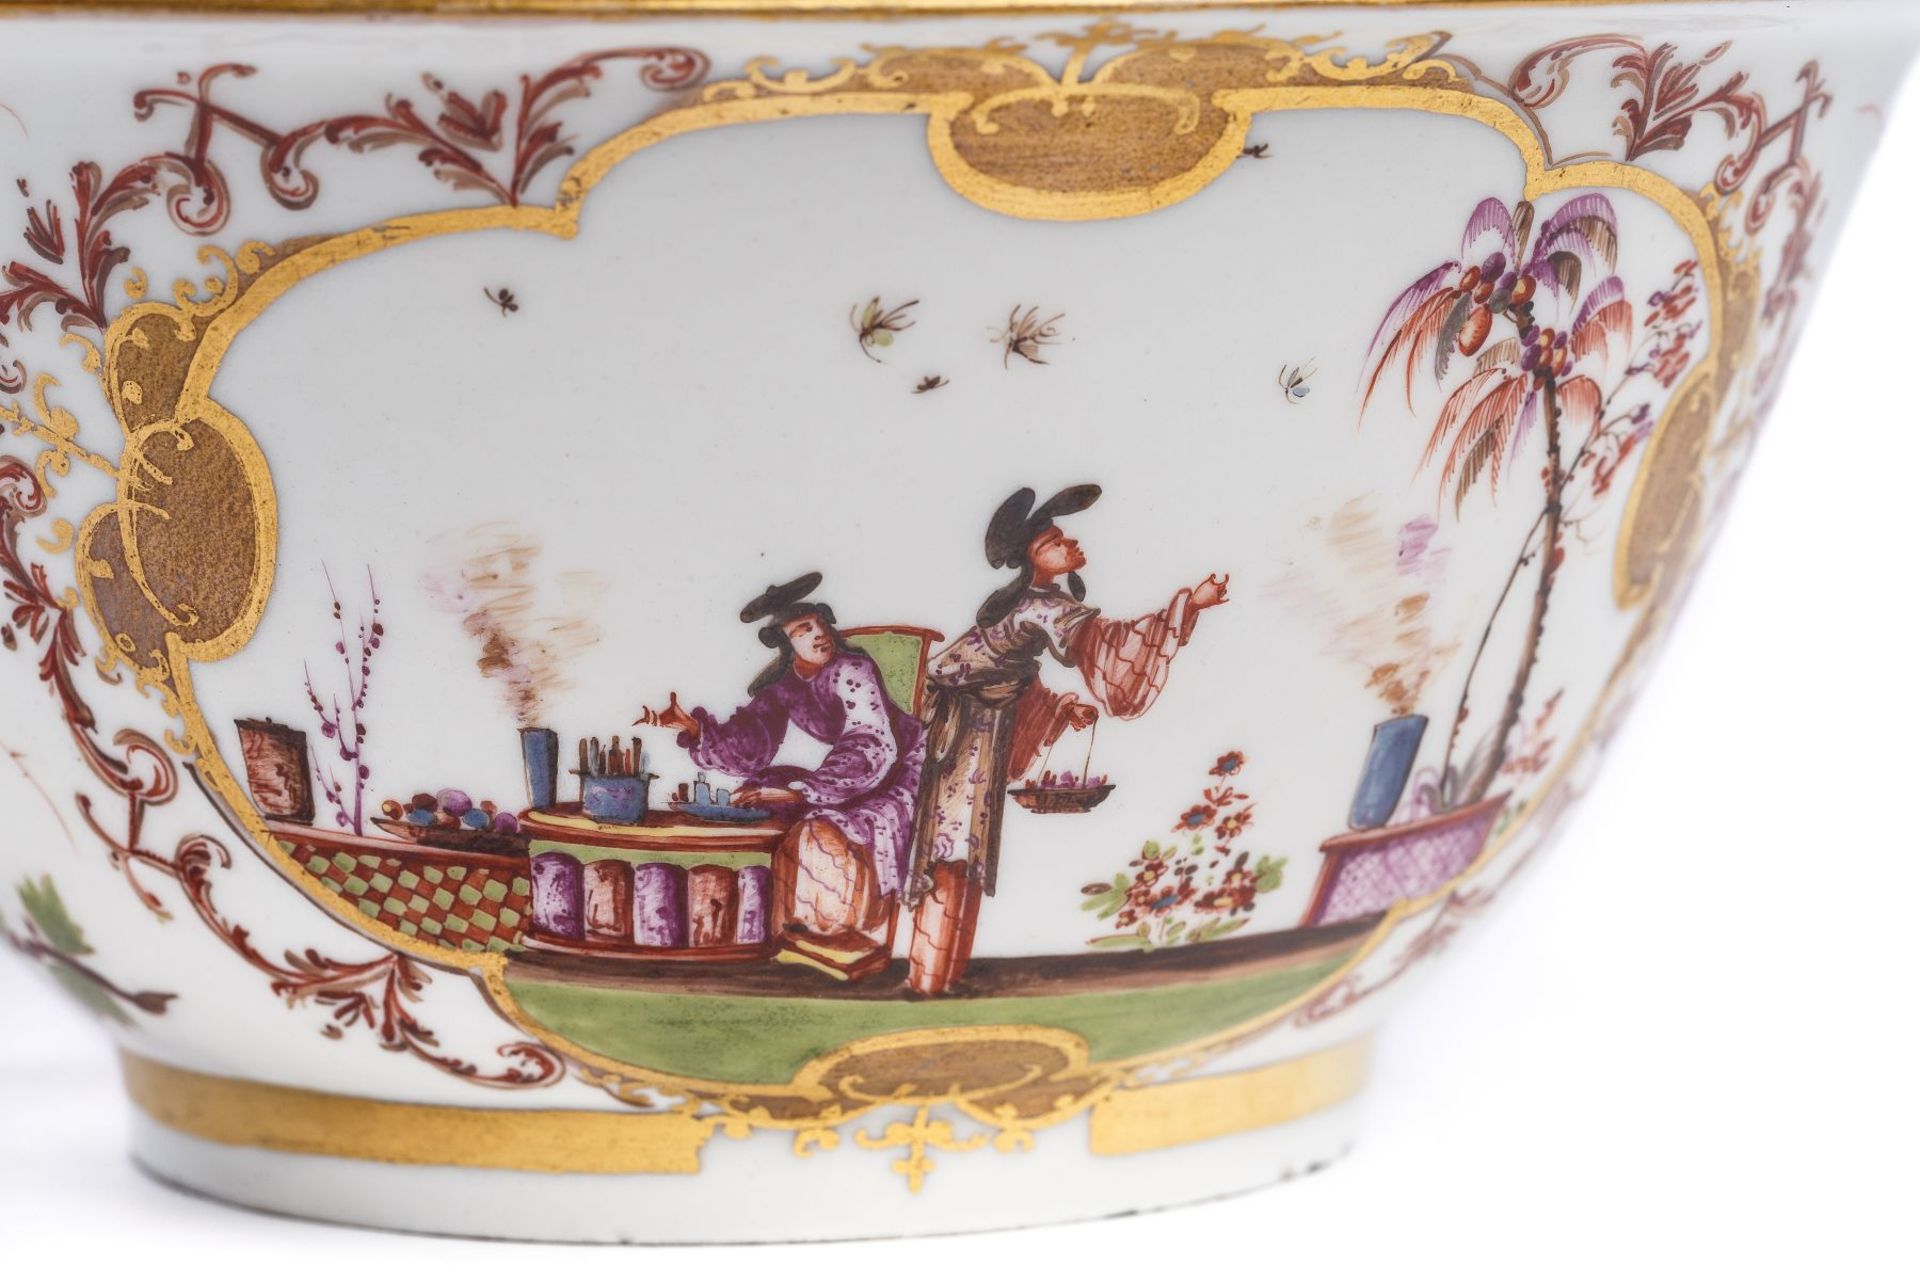 Rare bowl with "Chinoiserie" scenes, Meissen 1723/25 - Image 4 of 4